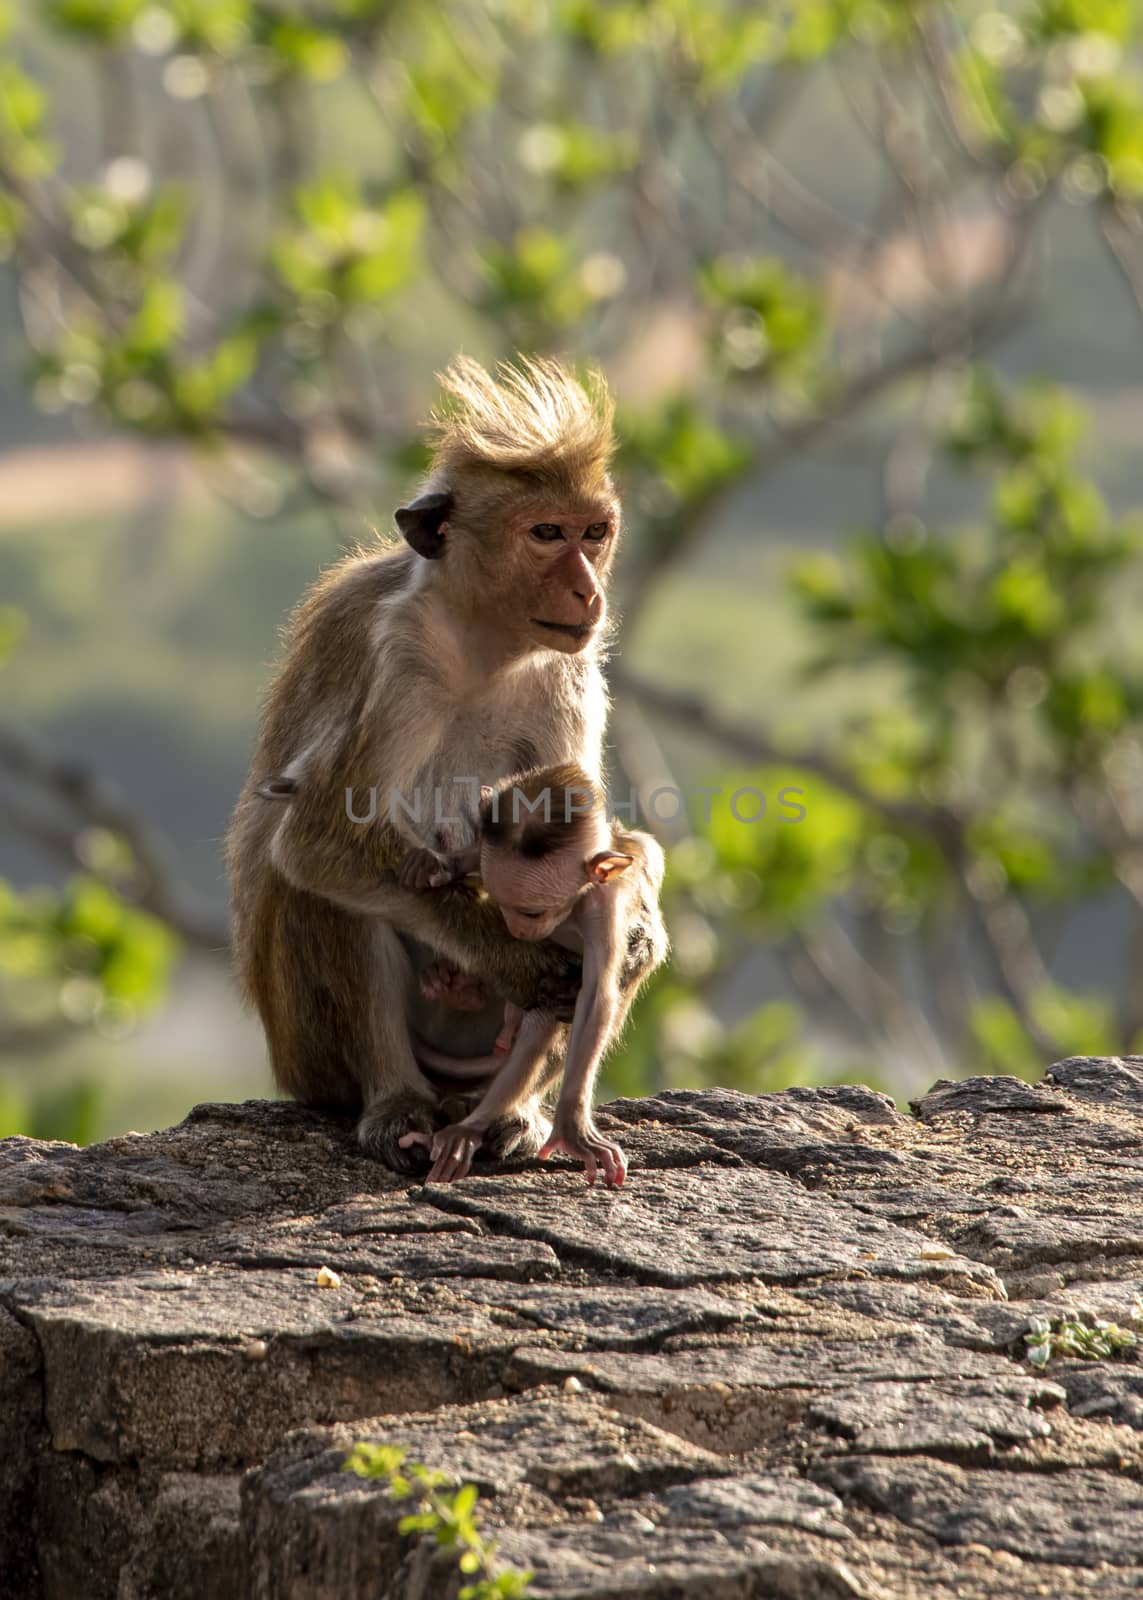 Sri lanka, Dambulla - Aug 2015: Mother and child, Wild Toque macaque  - Macaca sinica is an Old World monkey endemic to Sri Lanka